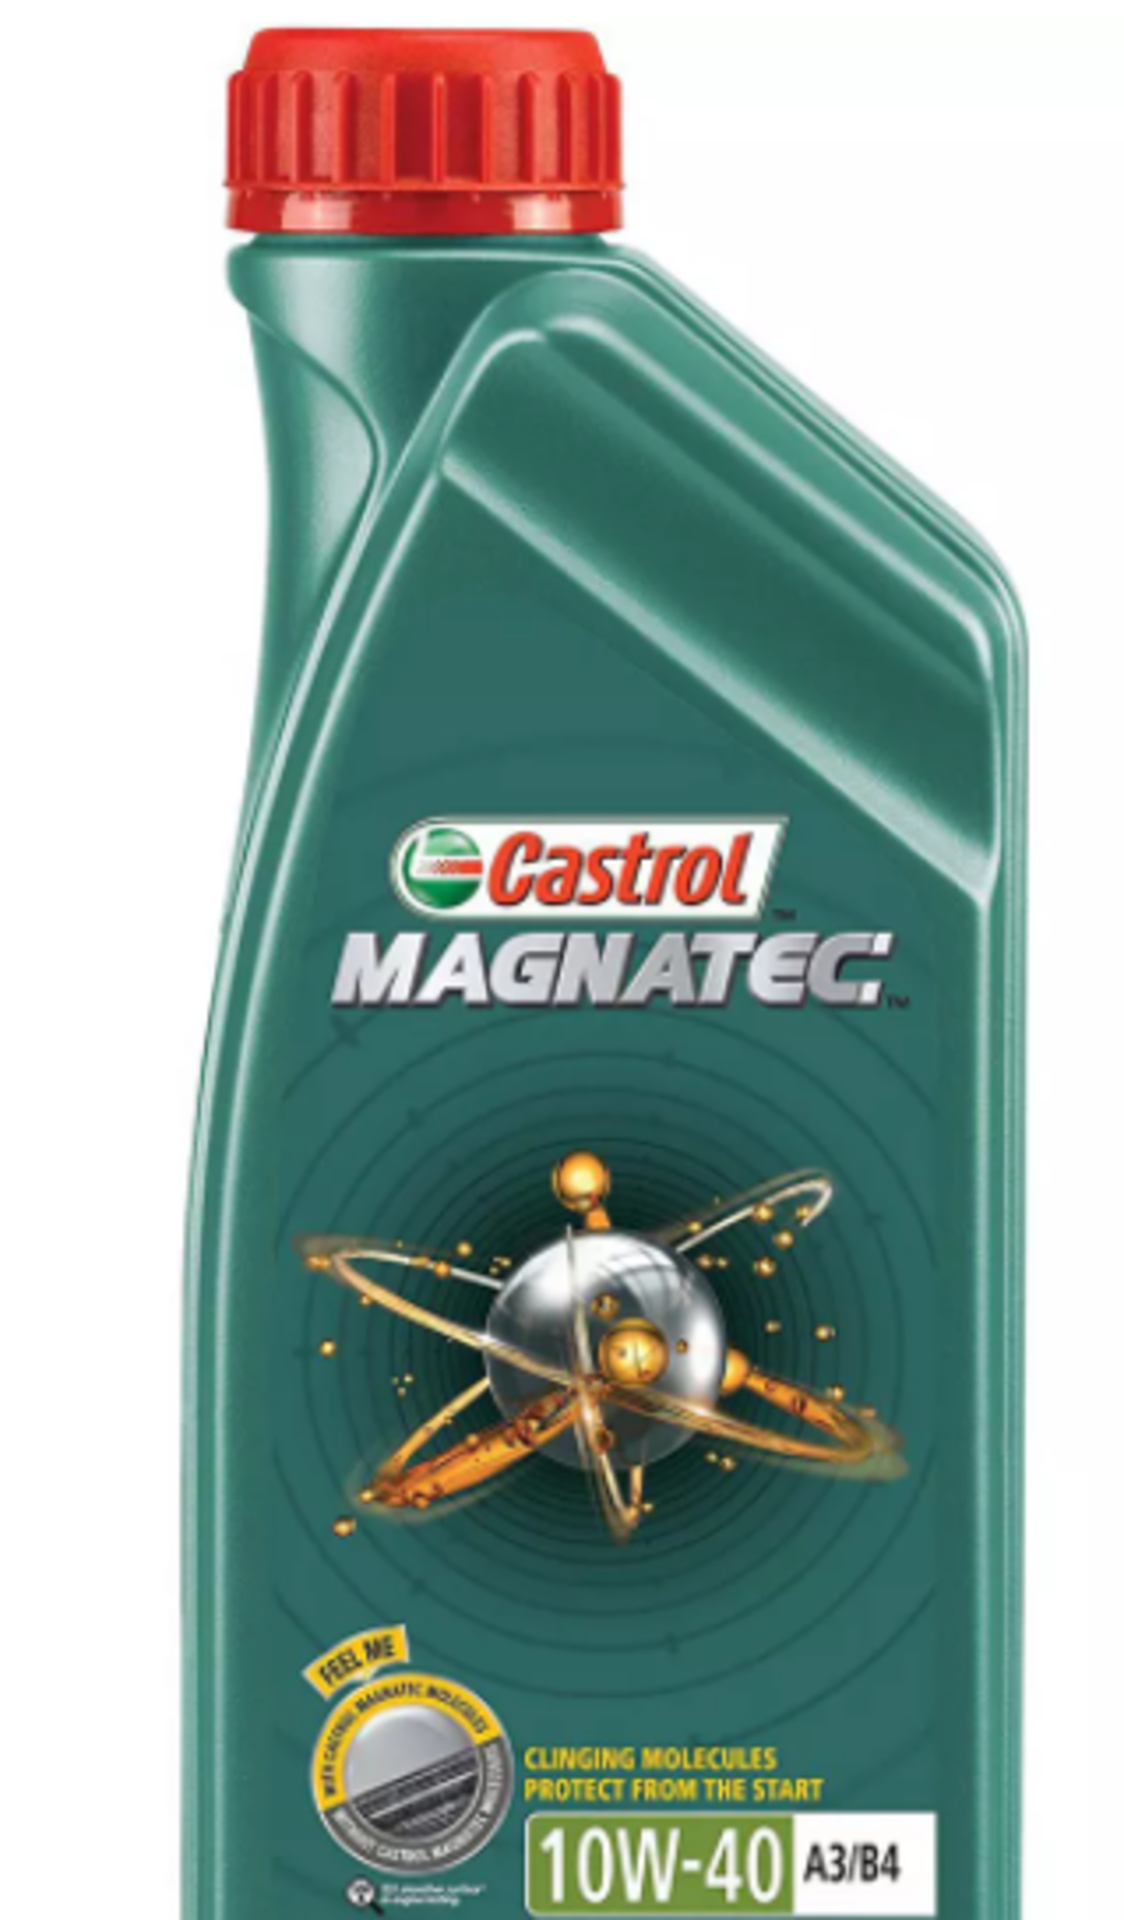 PALLET TO CONTAIN 48 X NEW Castrol Magnatec Stop-Start 10-40 Fully Synthetic 2L OIL. (ROW17)